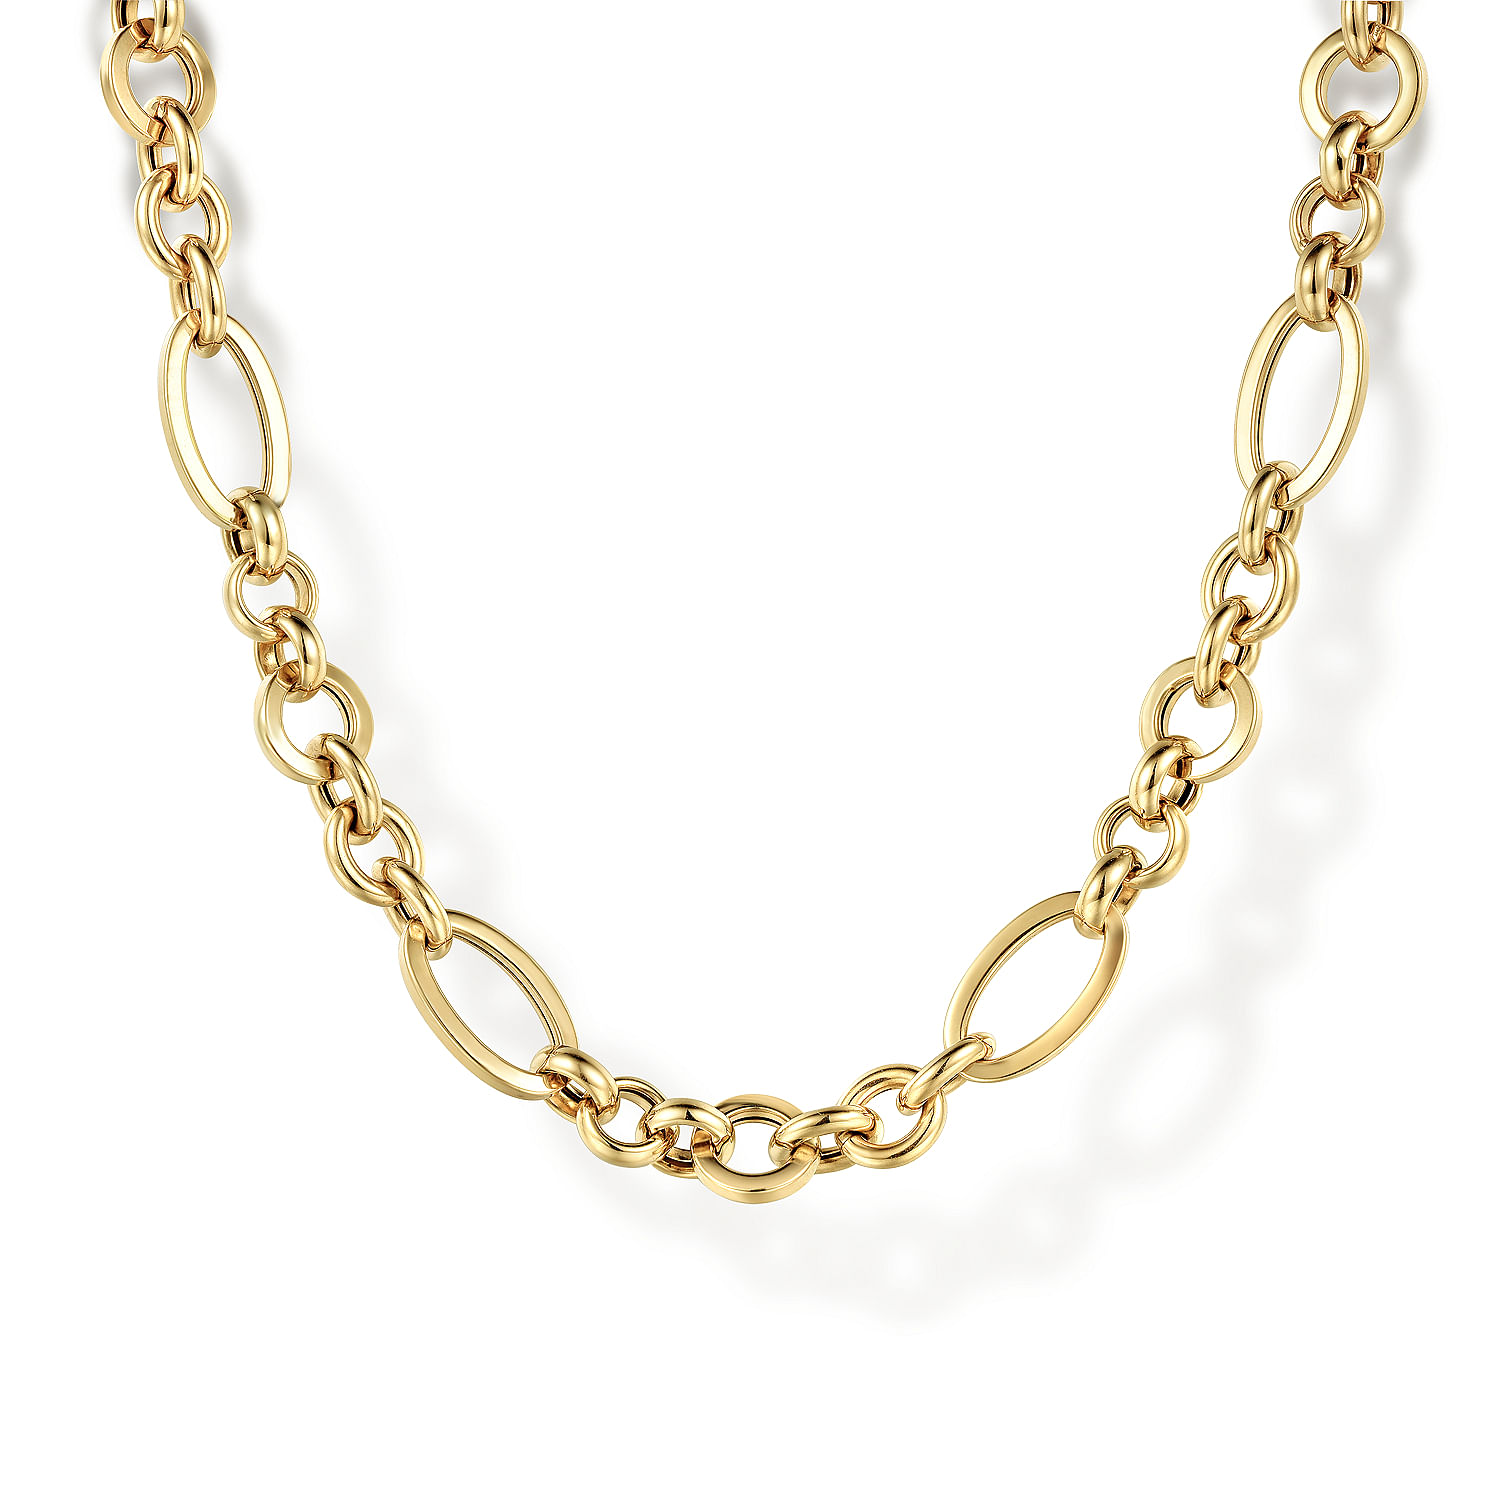 24 Inch 14K Yellow Gold Hollow Figaro Link Chain Necklace